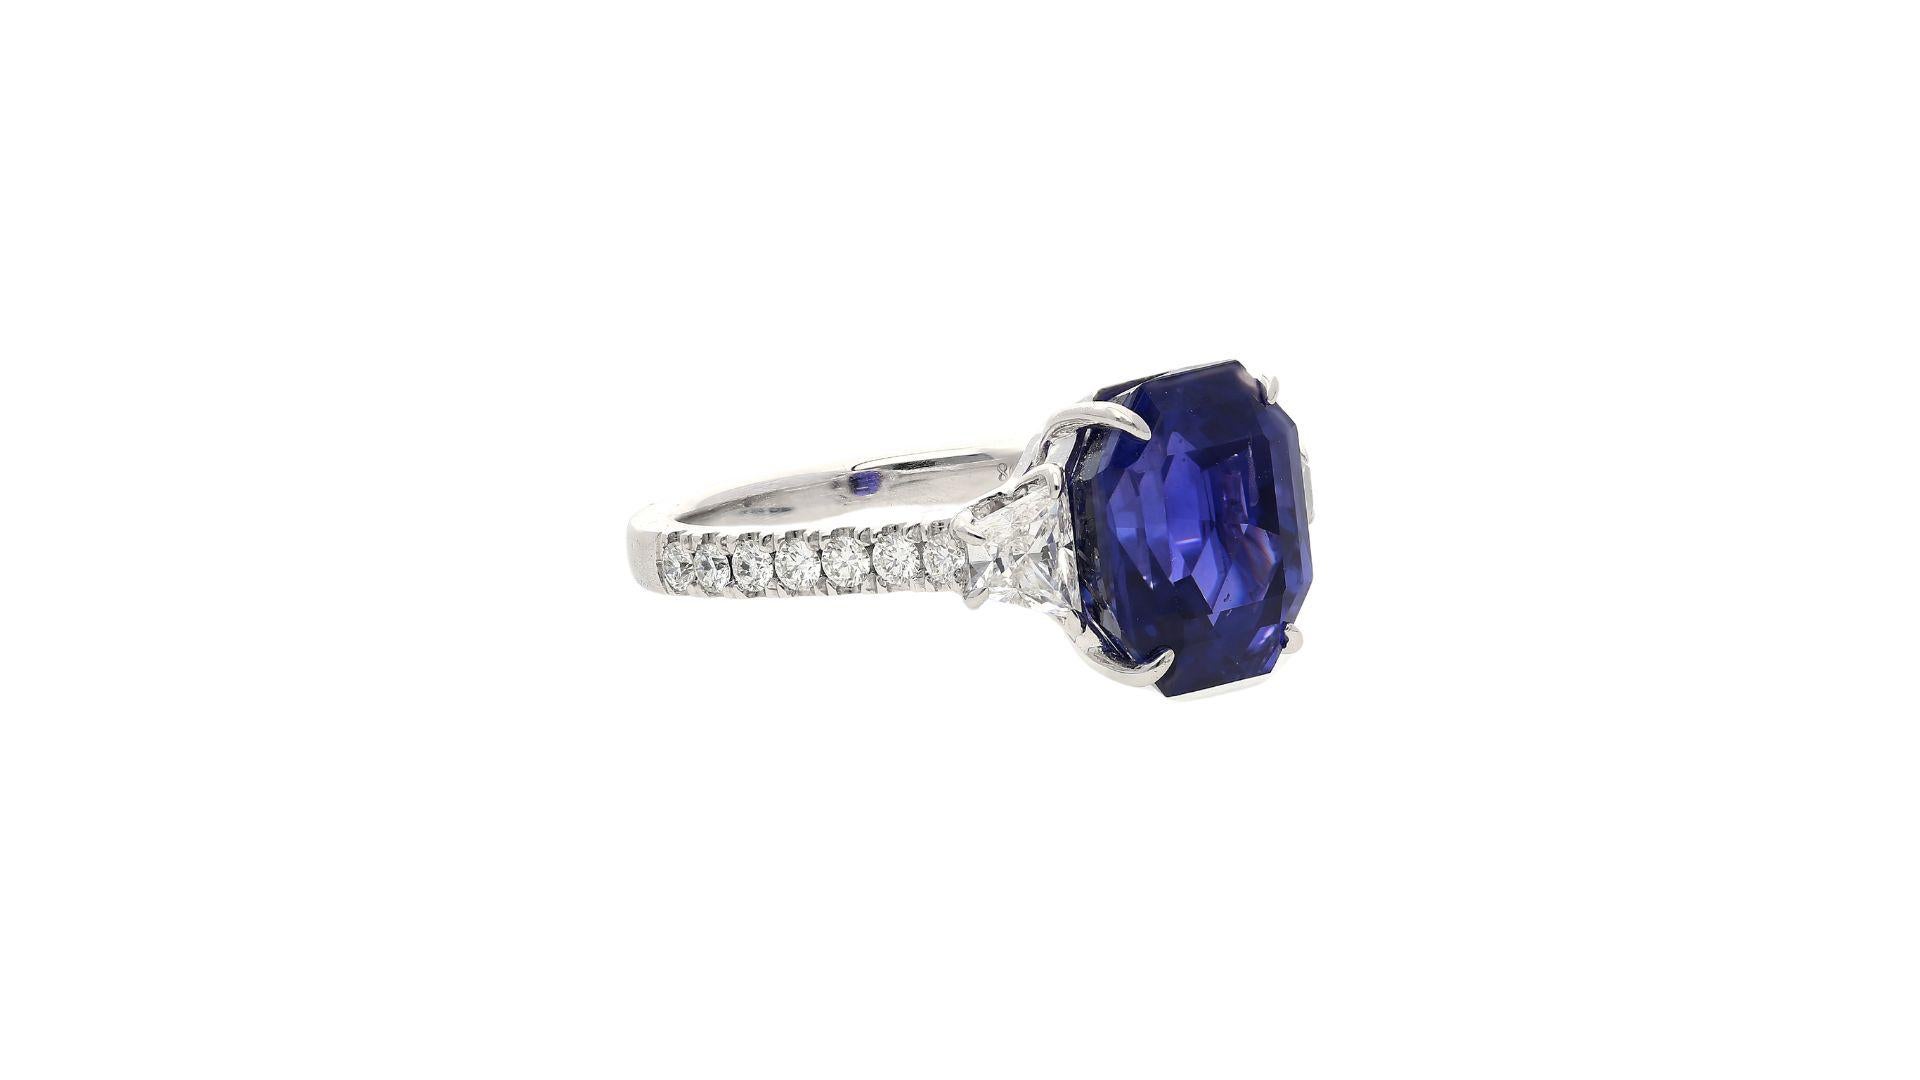 Hailing from the legendary mines of Ceylon, Sri Lanka, a 7.19 carat octagon cut sapphire with a color changing phenomenon. Shifting color from Purplish to Blue in different lights. 

Crafted in 18k white gold, with trapezoid cut diamond side stones